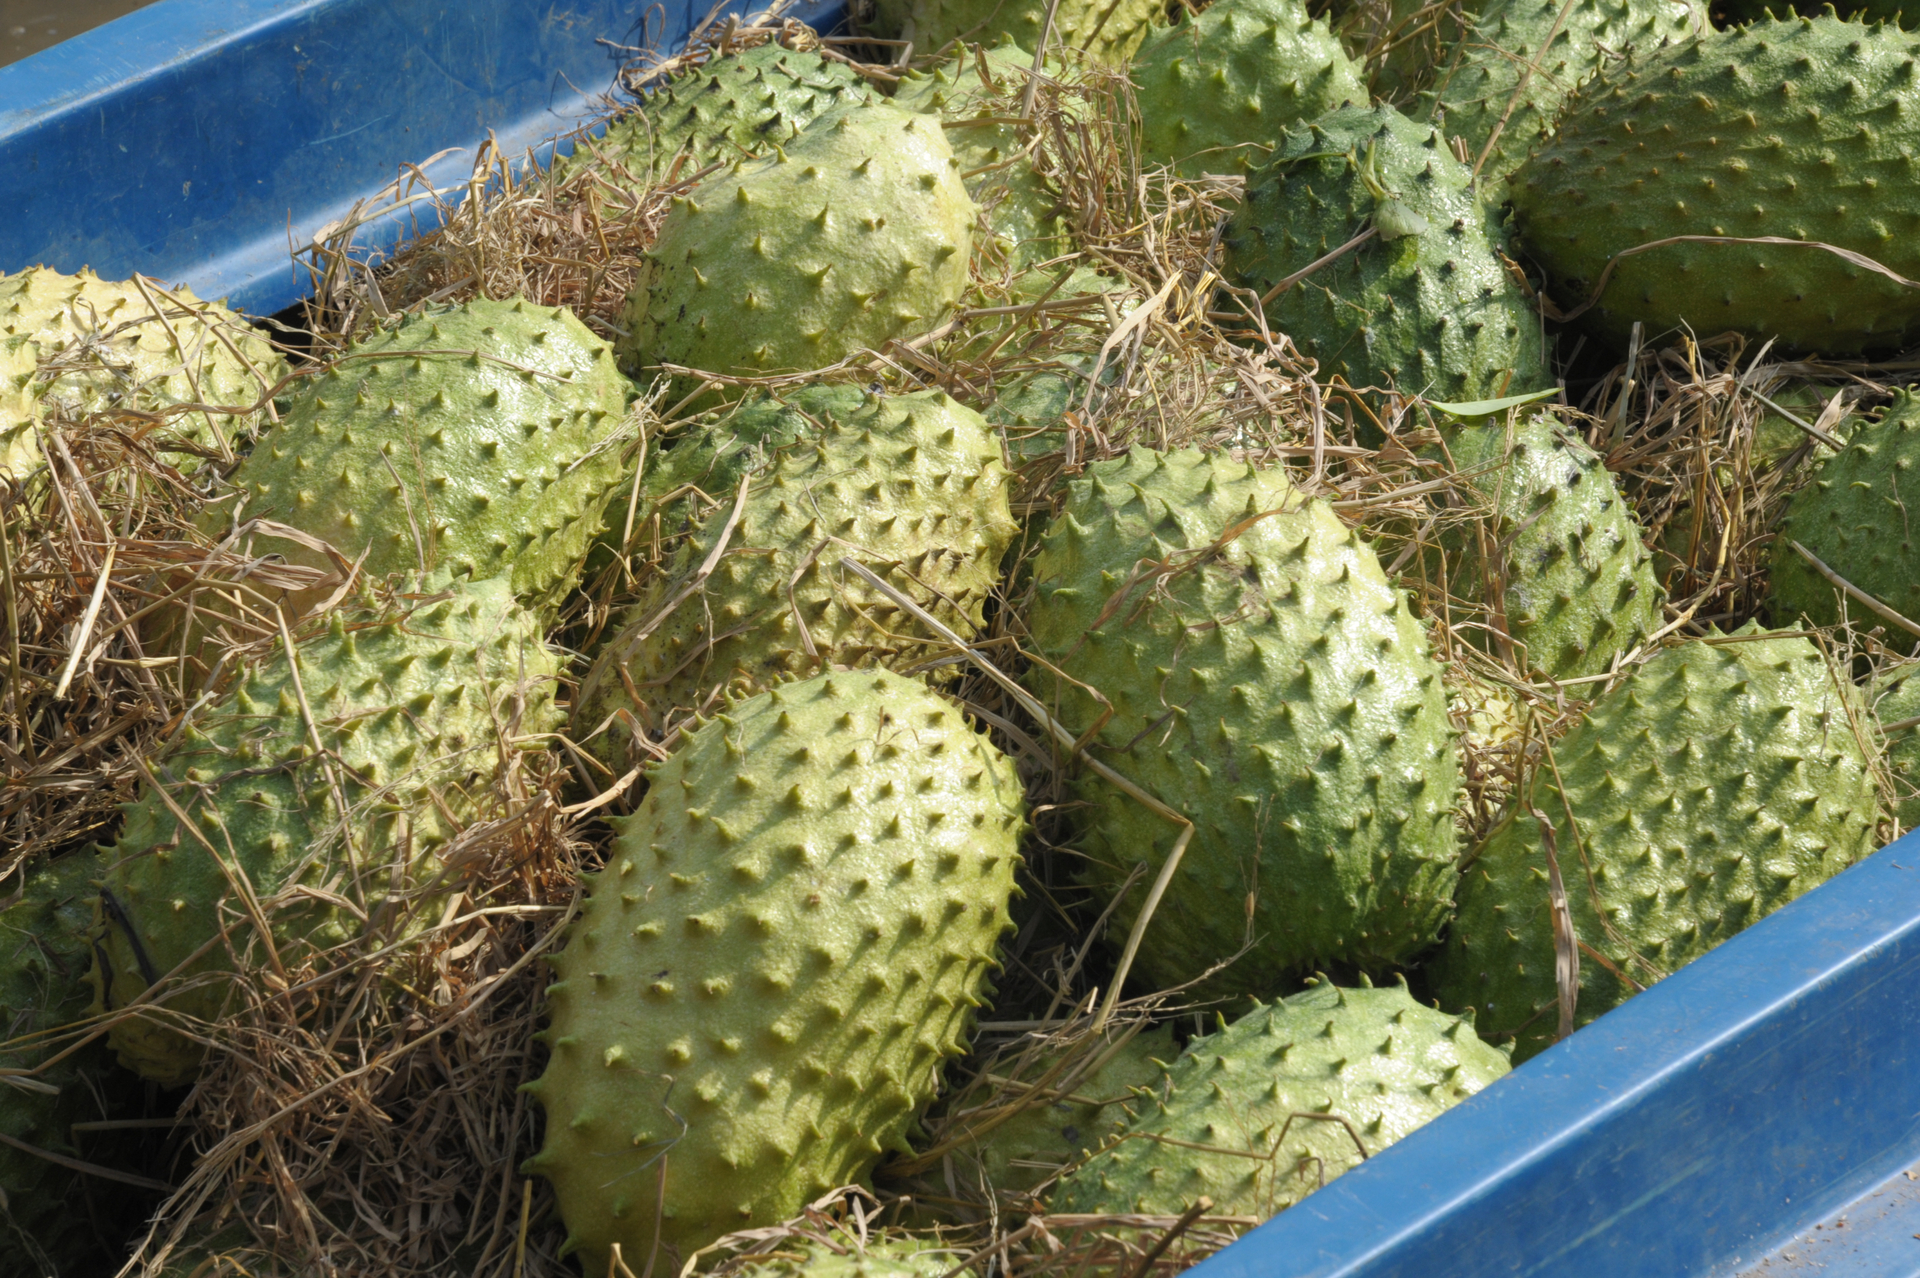 For the first time, Can Tho officially exported nearly 20 tons of Ri6 durian to the billion-people market. Photo: Le Hoang Vu.